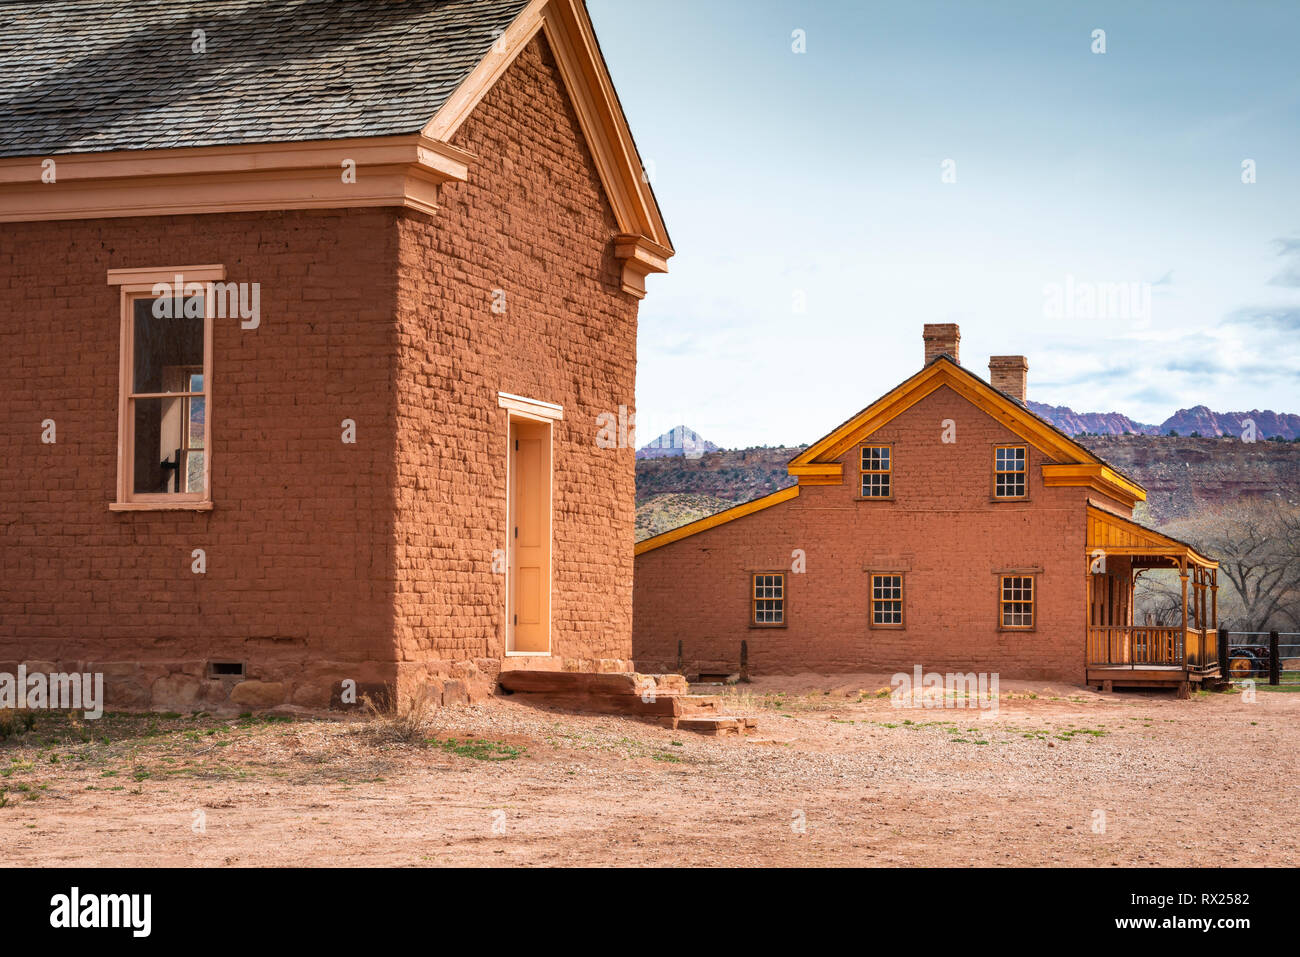 Alonzo Russell adobe house (featured in the film 'Butch Cassidy and the Sundance Kid') and schoolhouse, Grafton ghost town, Utah USA Stock Photo